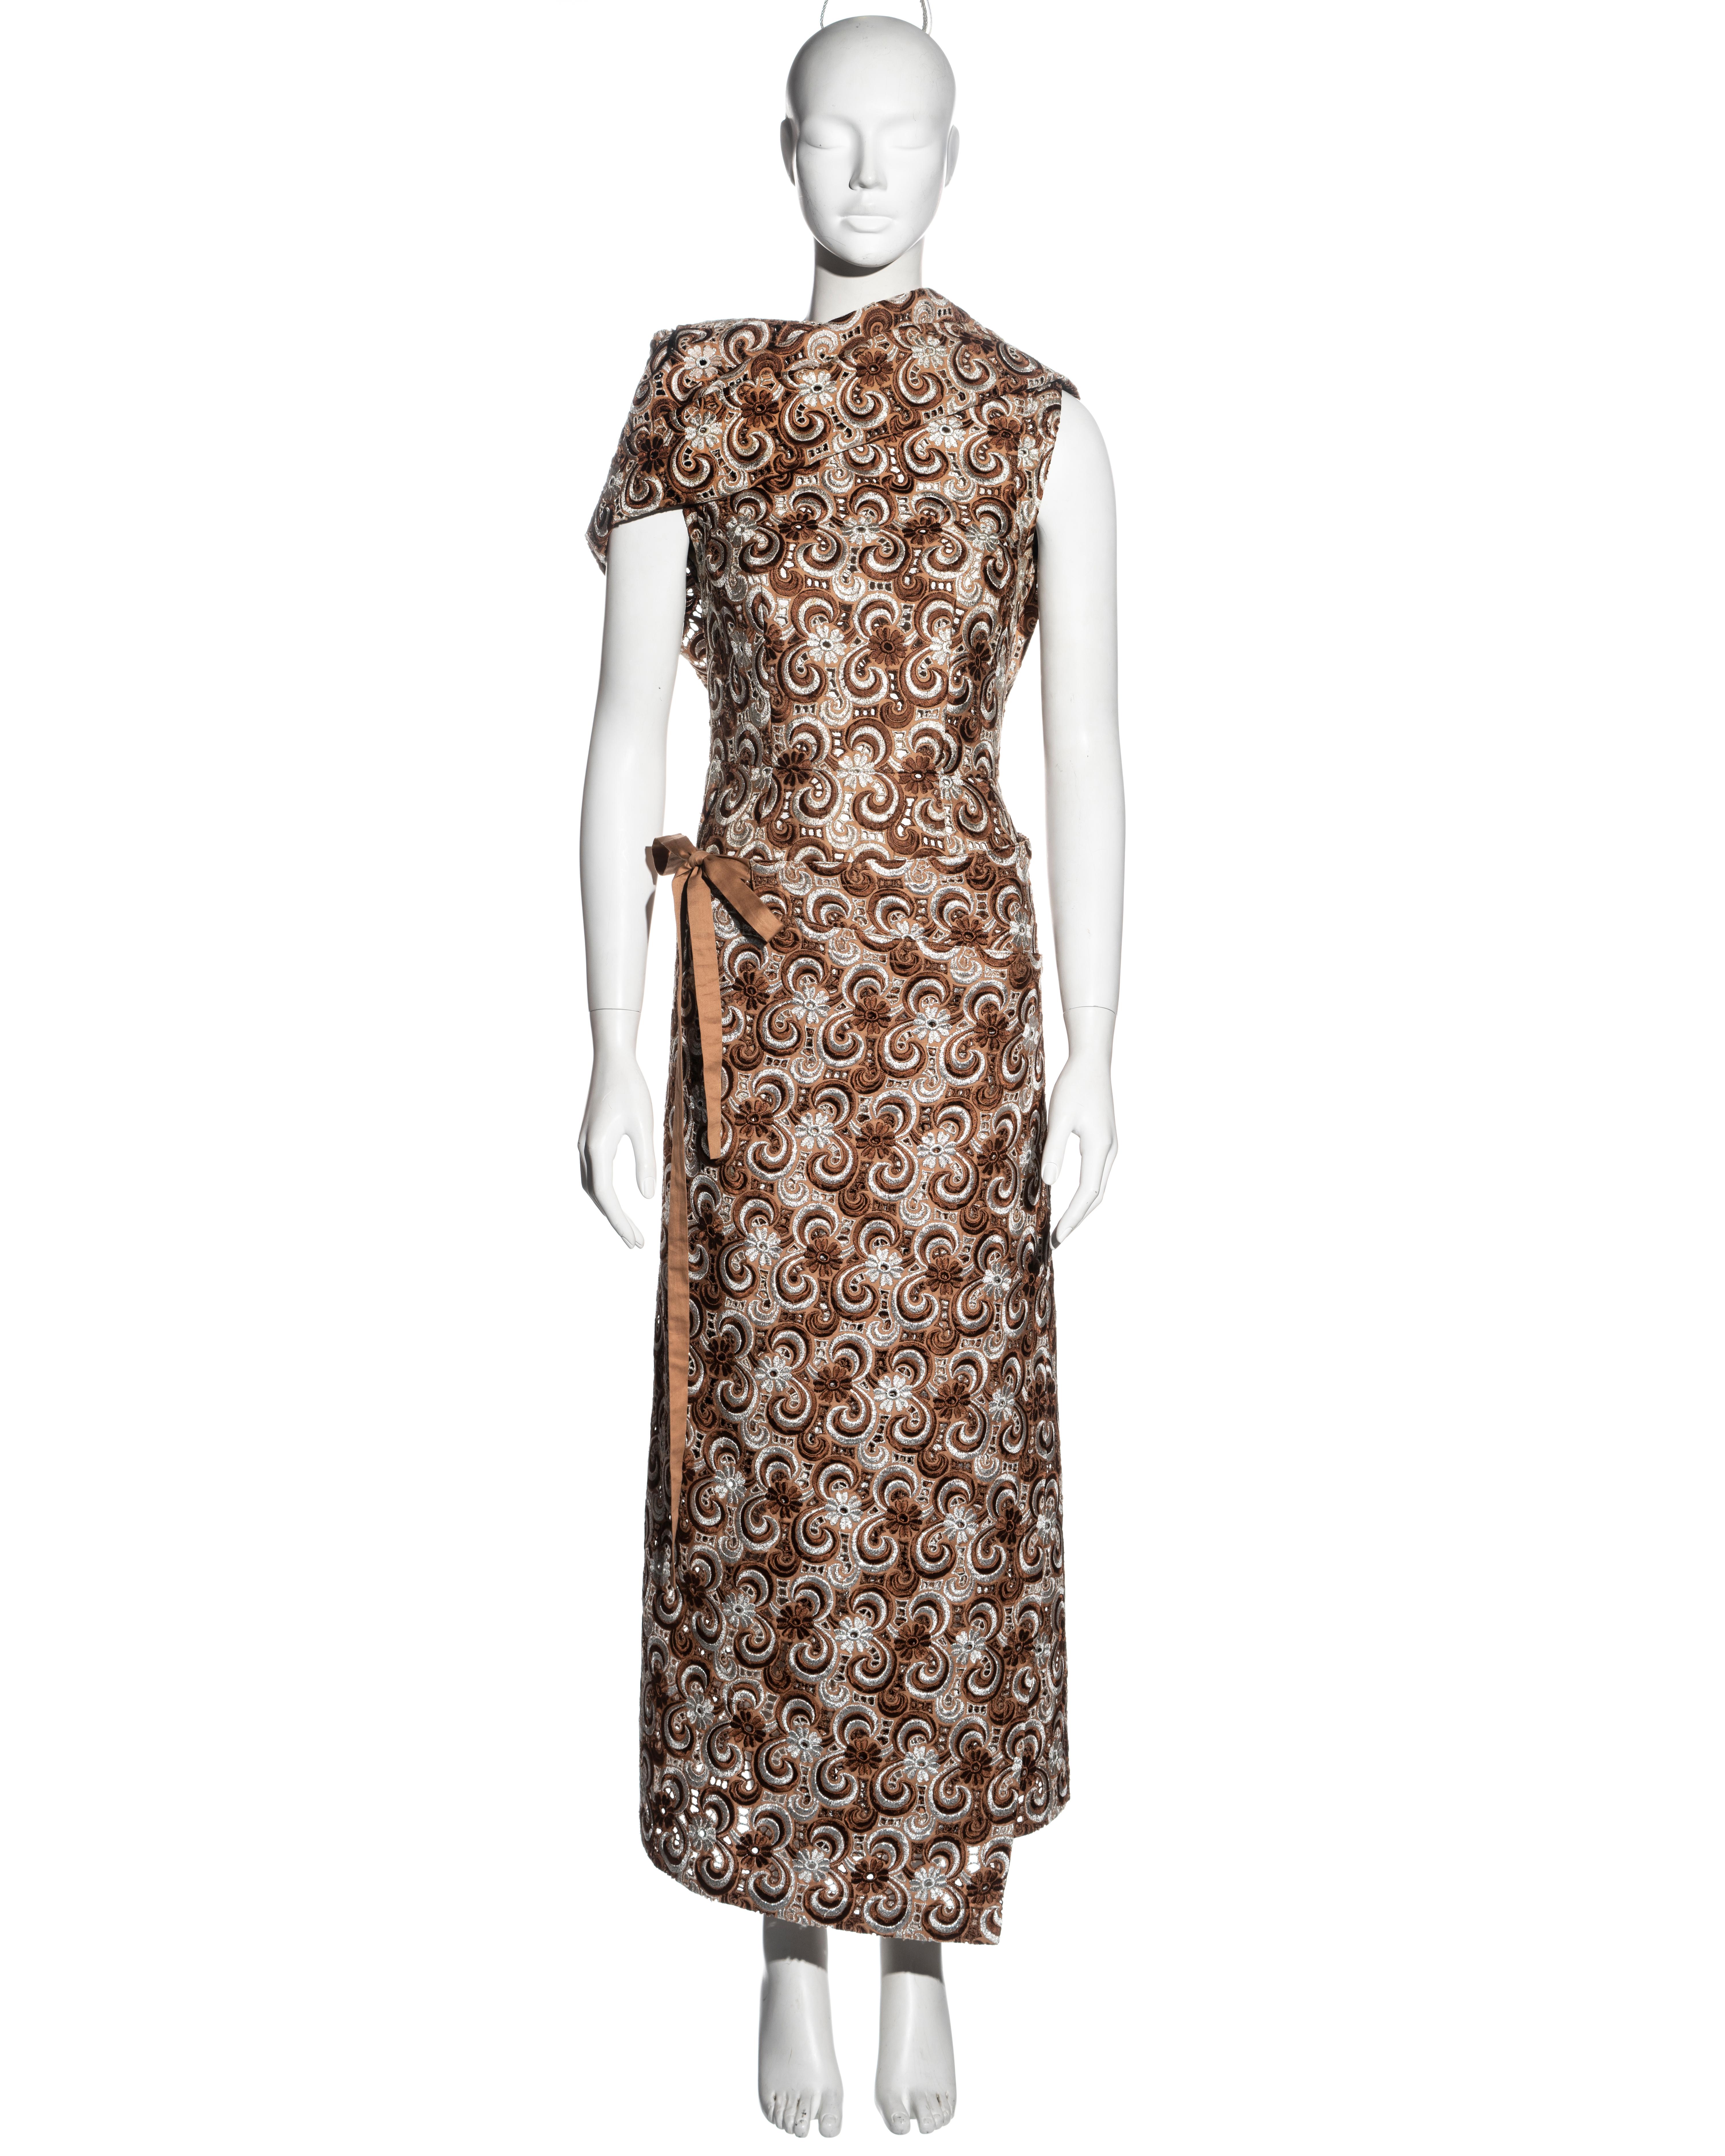 ▪ Comme des Garçons dress and skirt set 
▪ Lurex voile lace in brown, silver and cream 
▪ Mid-length wrap dress 
▪ Large turn-over collar 
▪ Two large safety pin closures at the back 
▪ Maxi wrap skirt with ribbon ties 
▪ Size Medium
▪ Fall-Winter